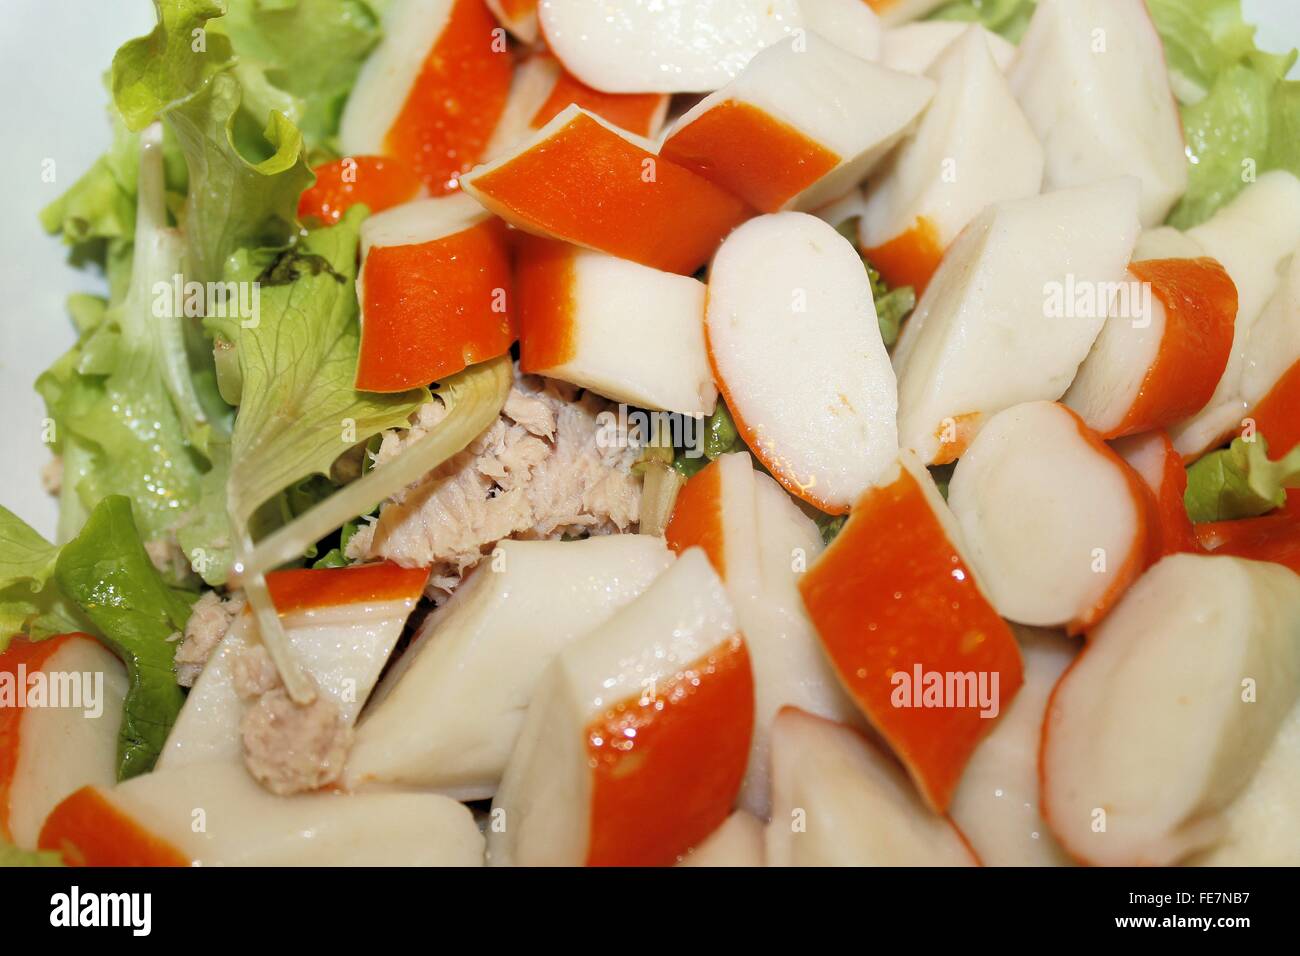 Salad with pieces of red crab stick and fresh lettuce Stock Photo